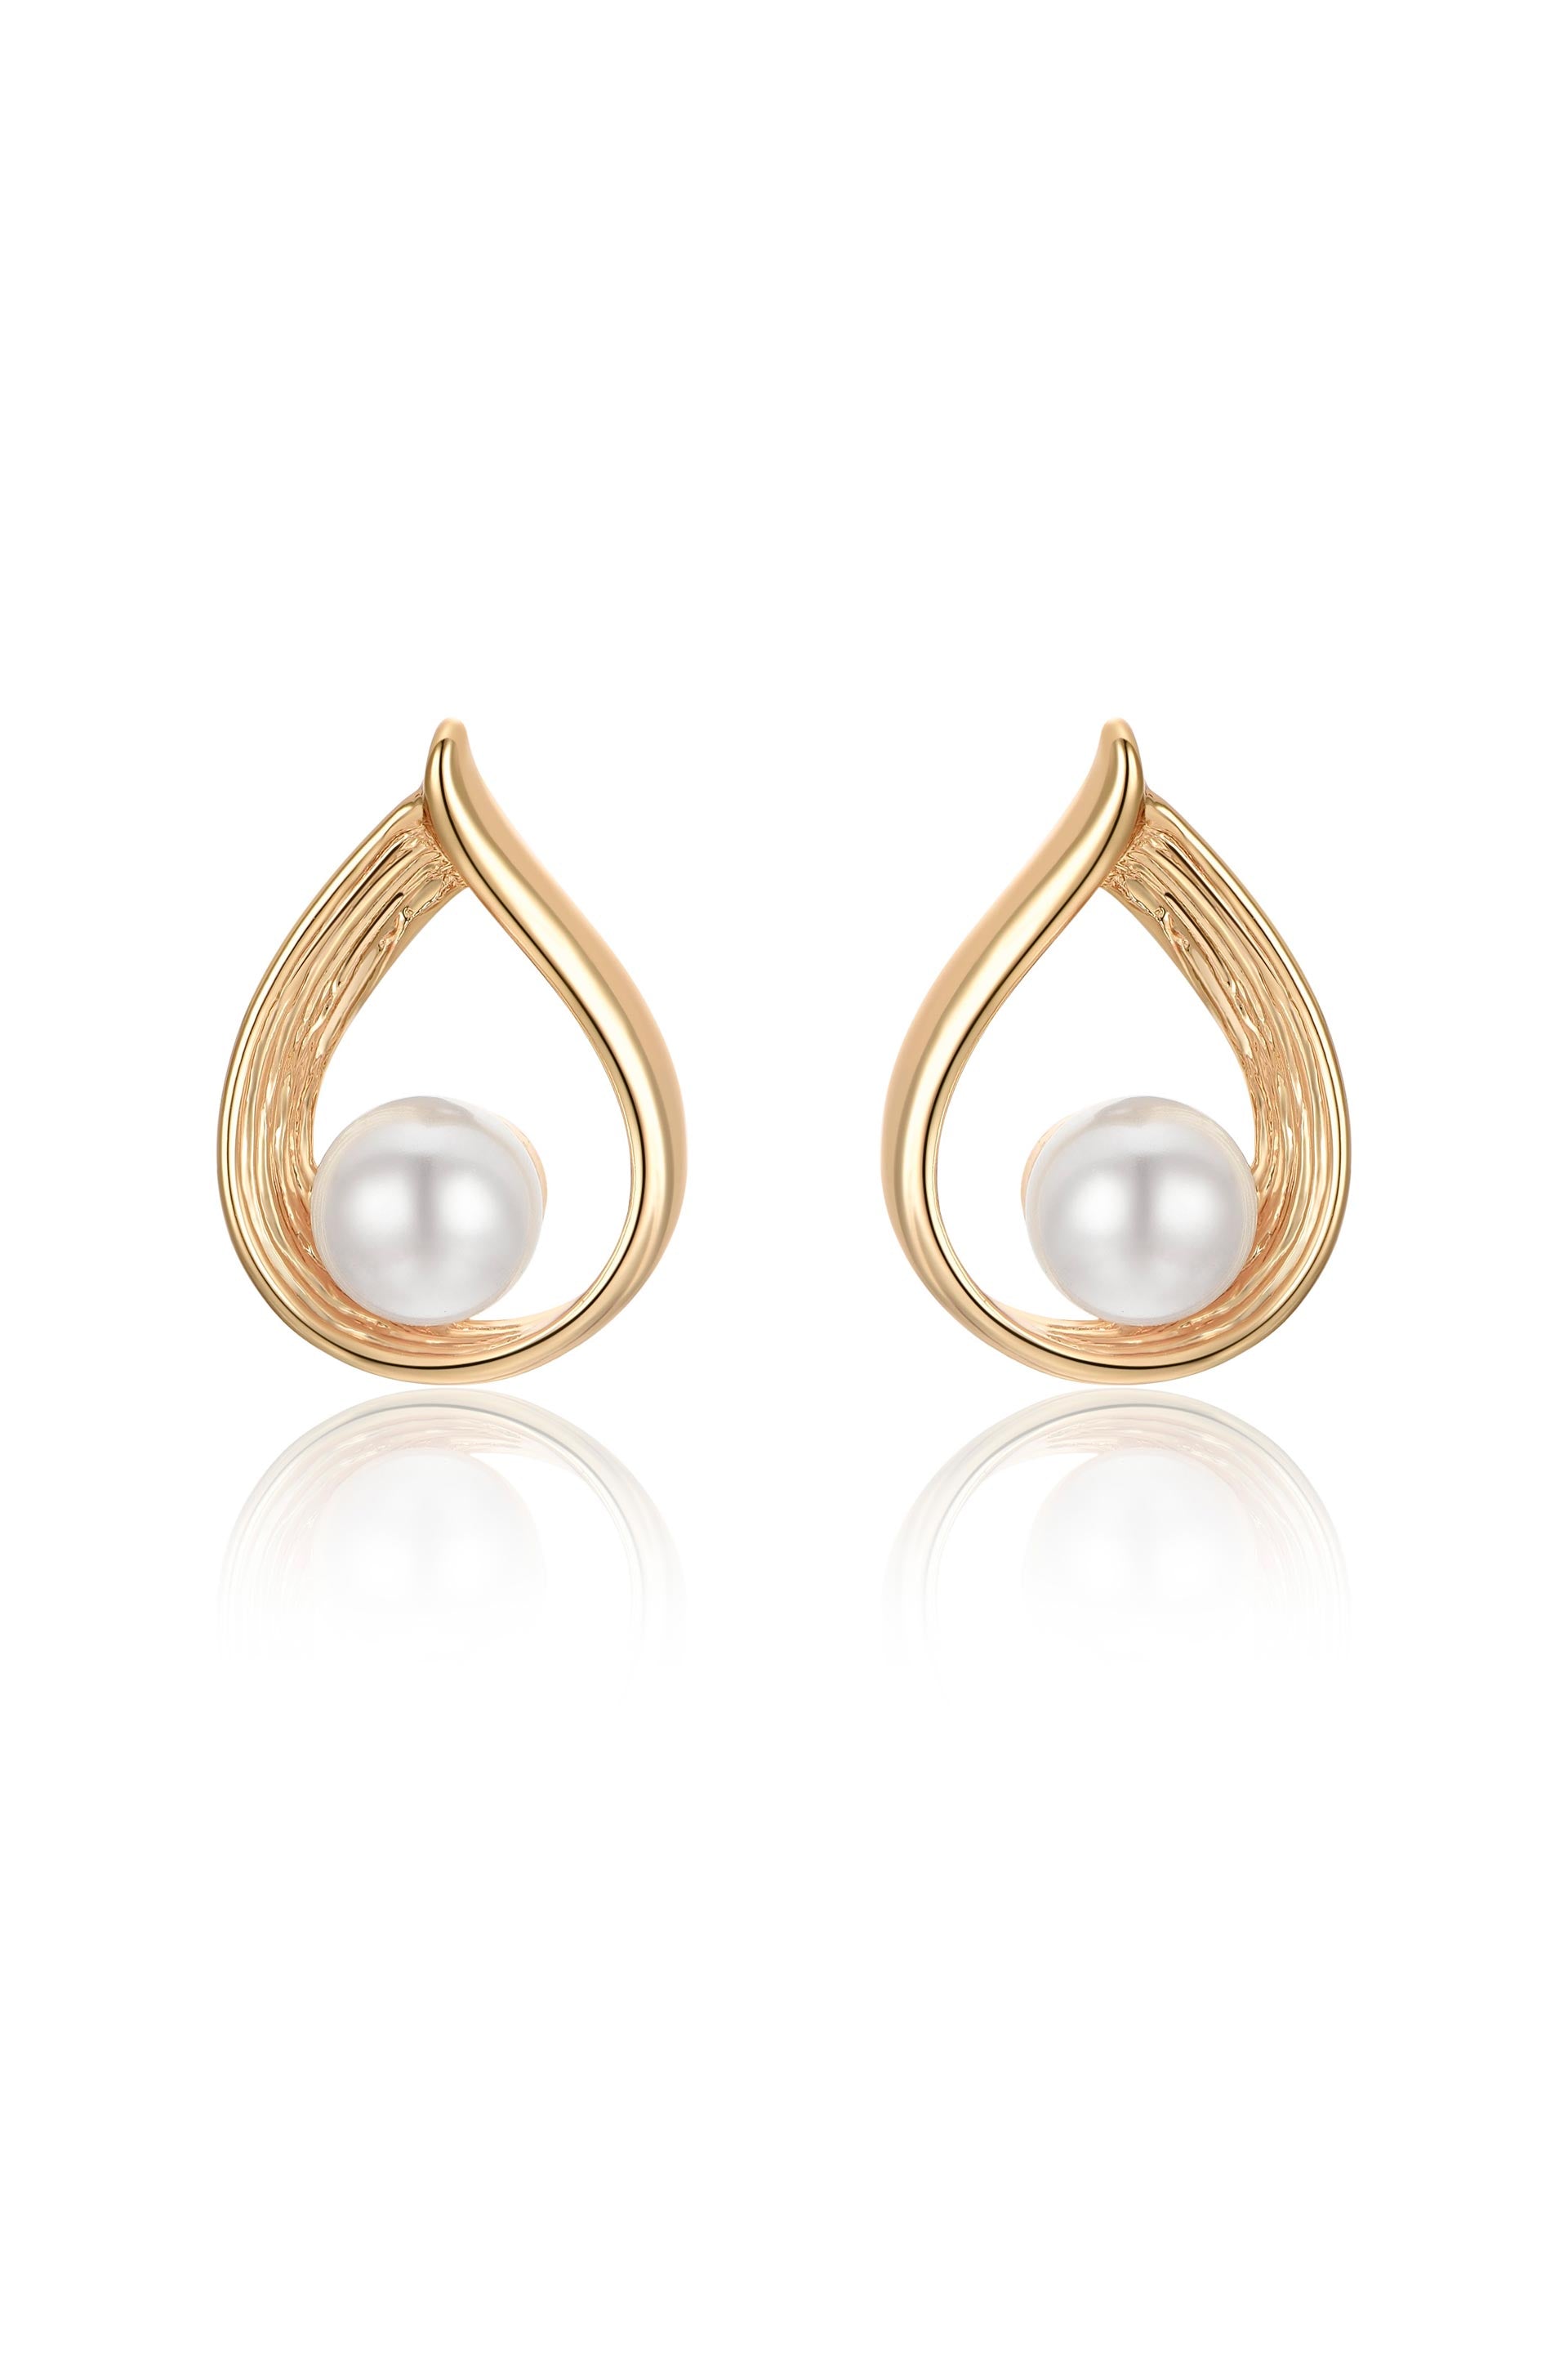 Golden Teardrop and Pearl 18k Gold Plated Earrings on white